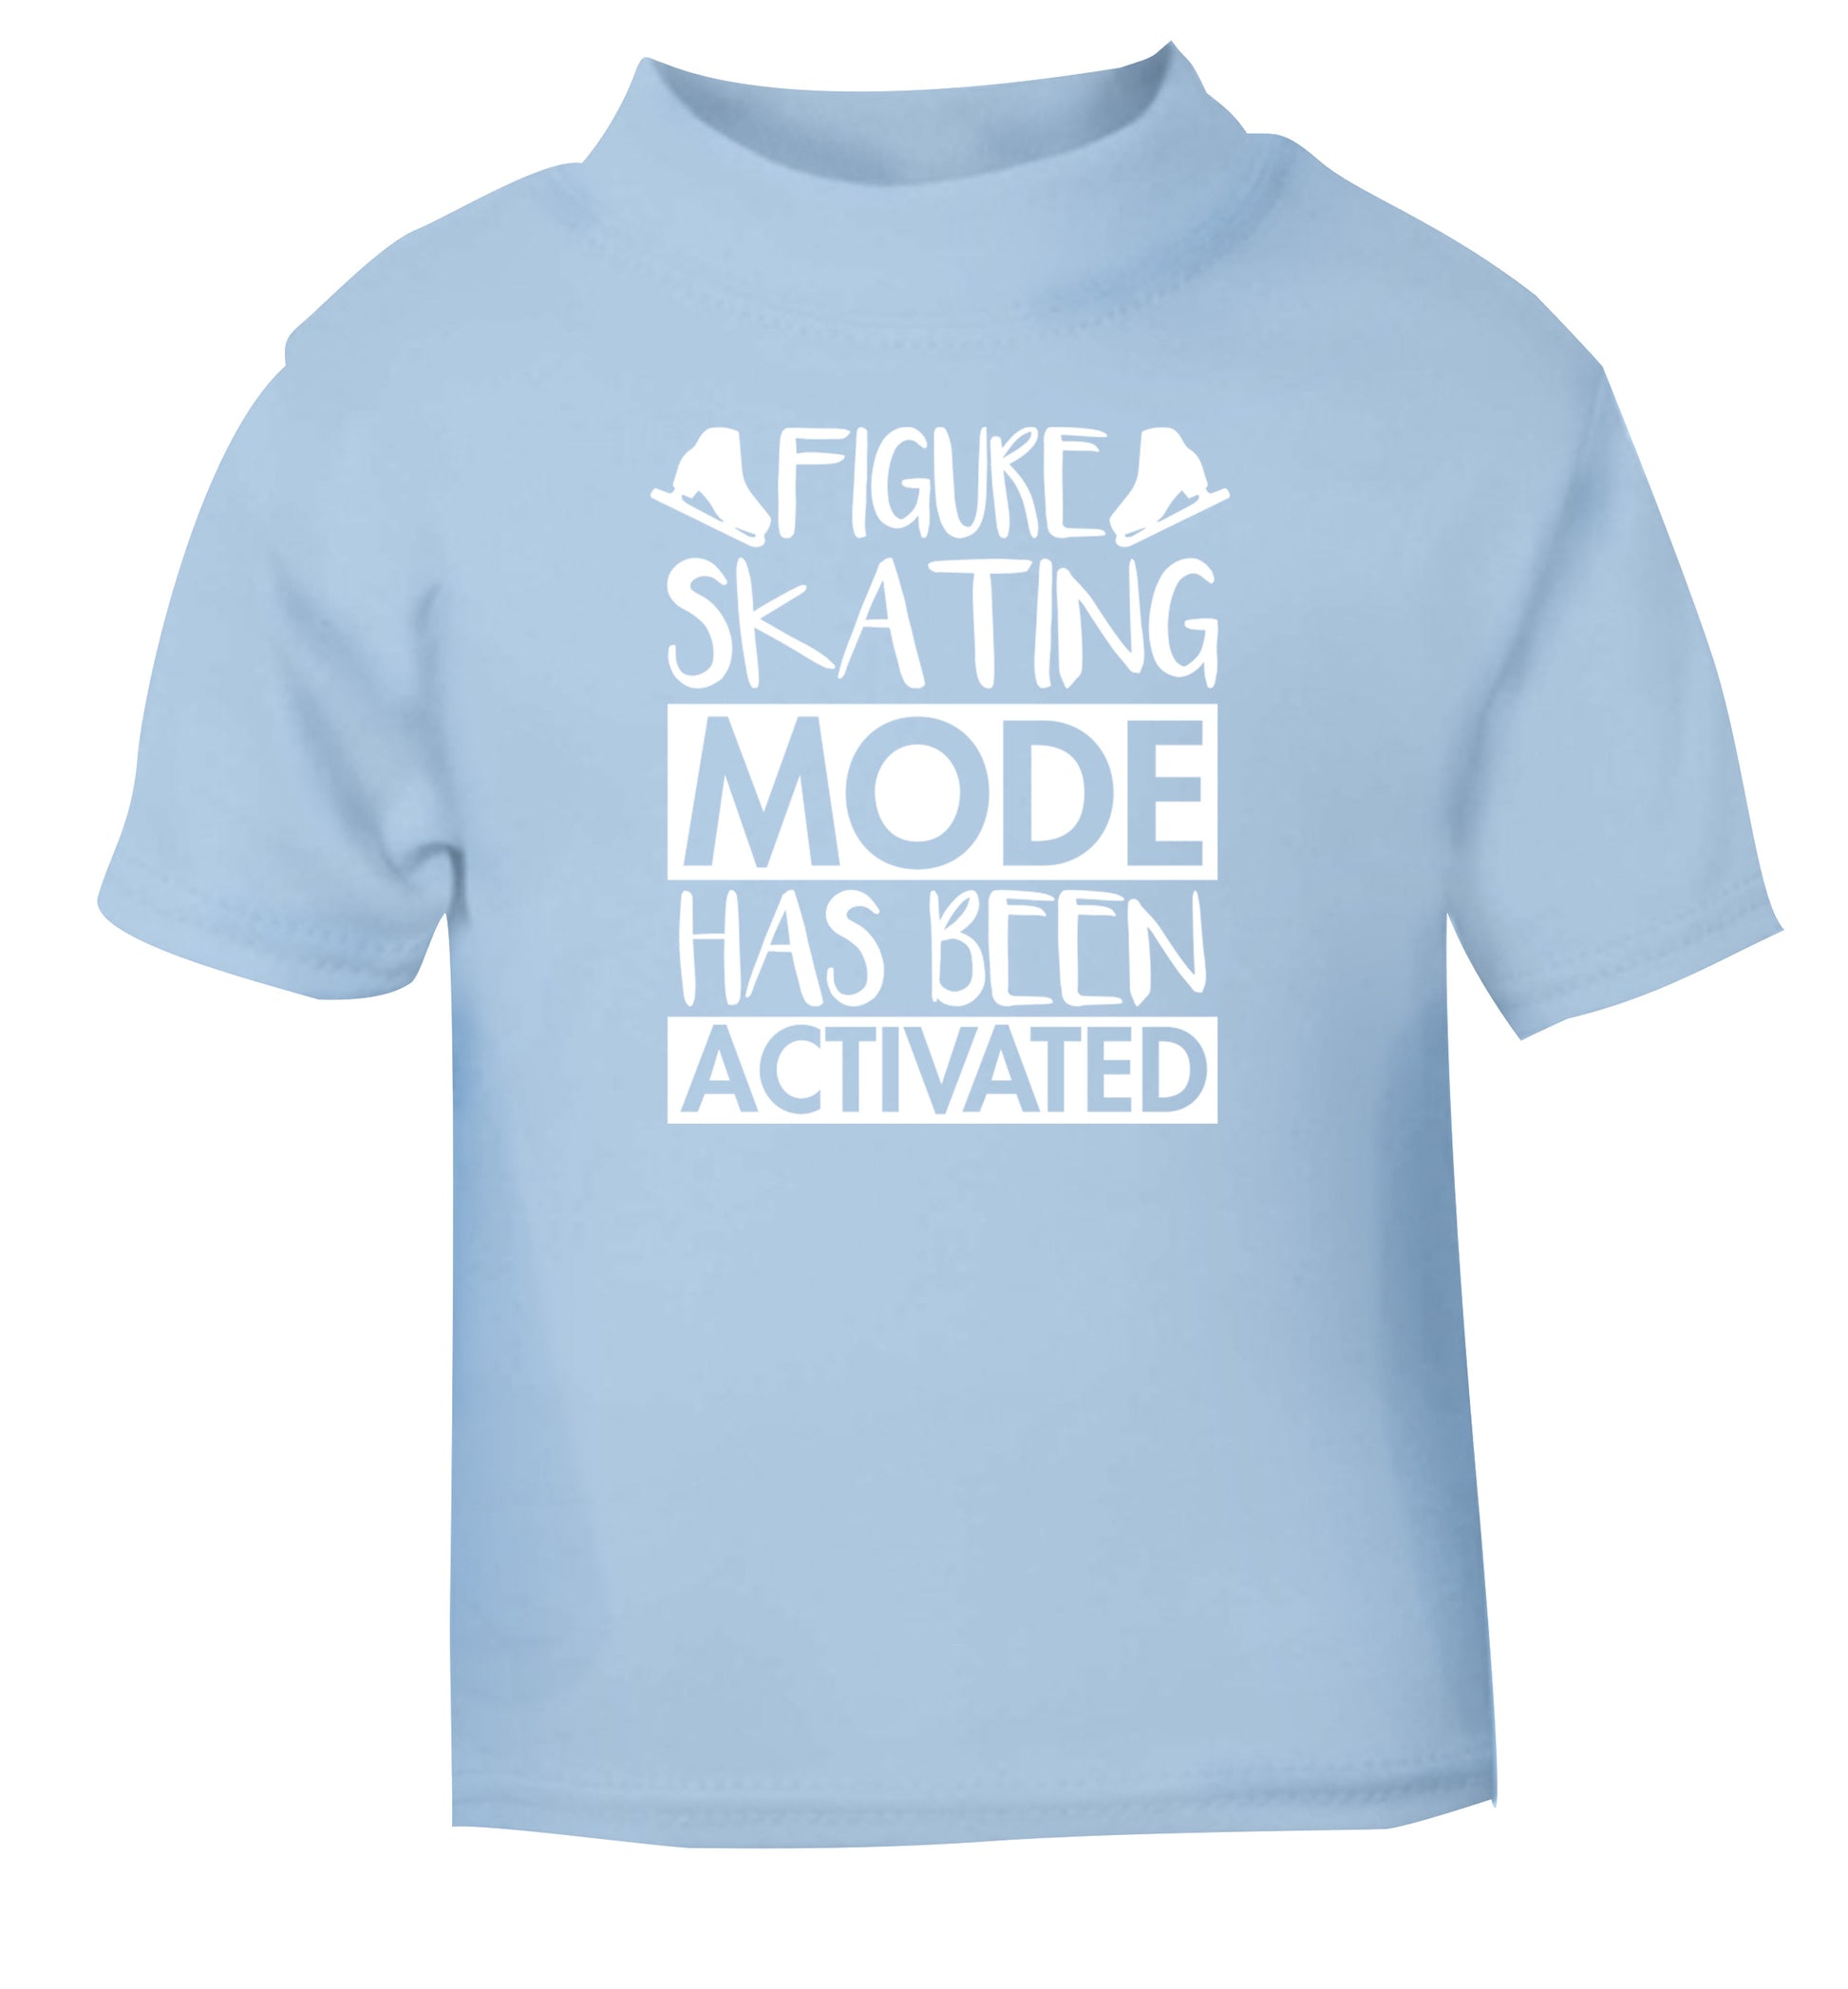 Figure skating mode activated light blue Baby Toddler Tshirt 2 Years